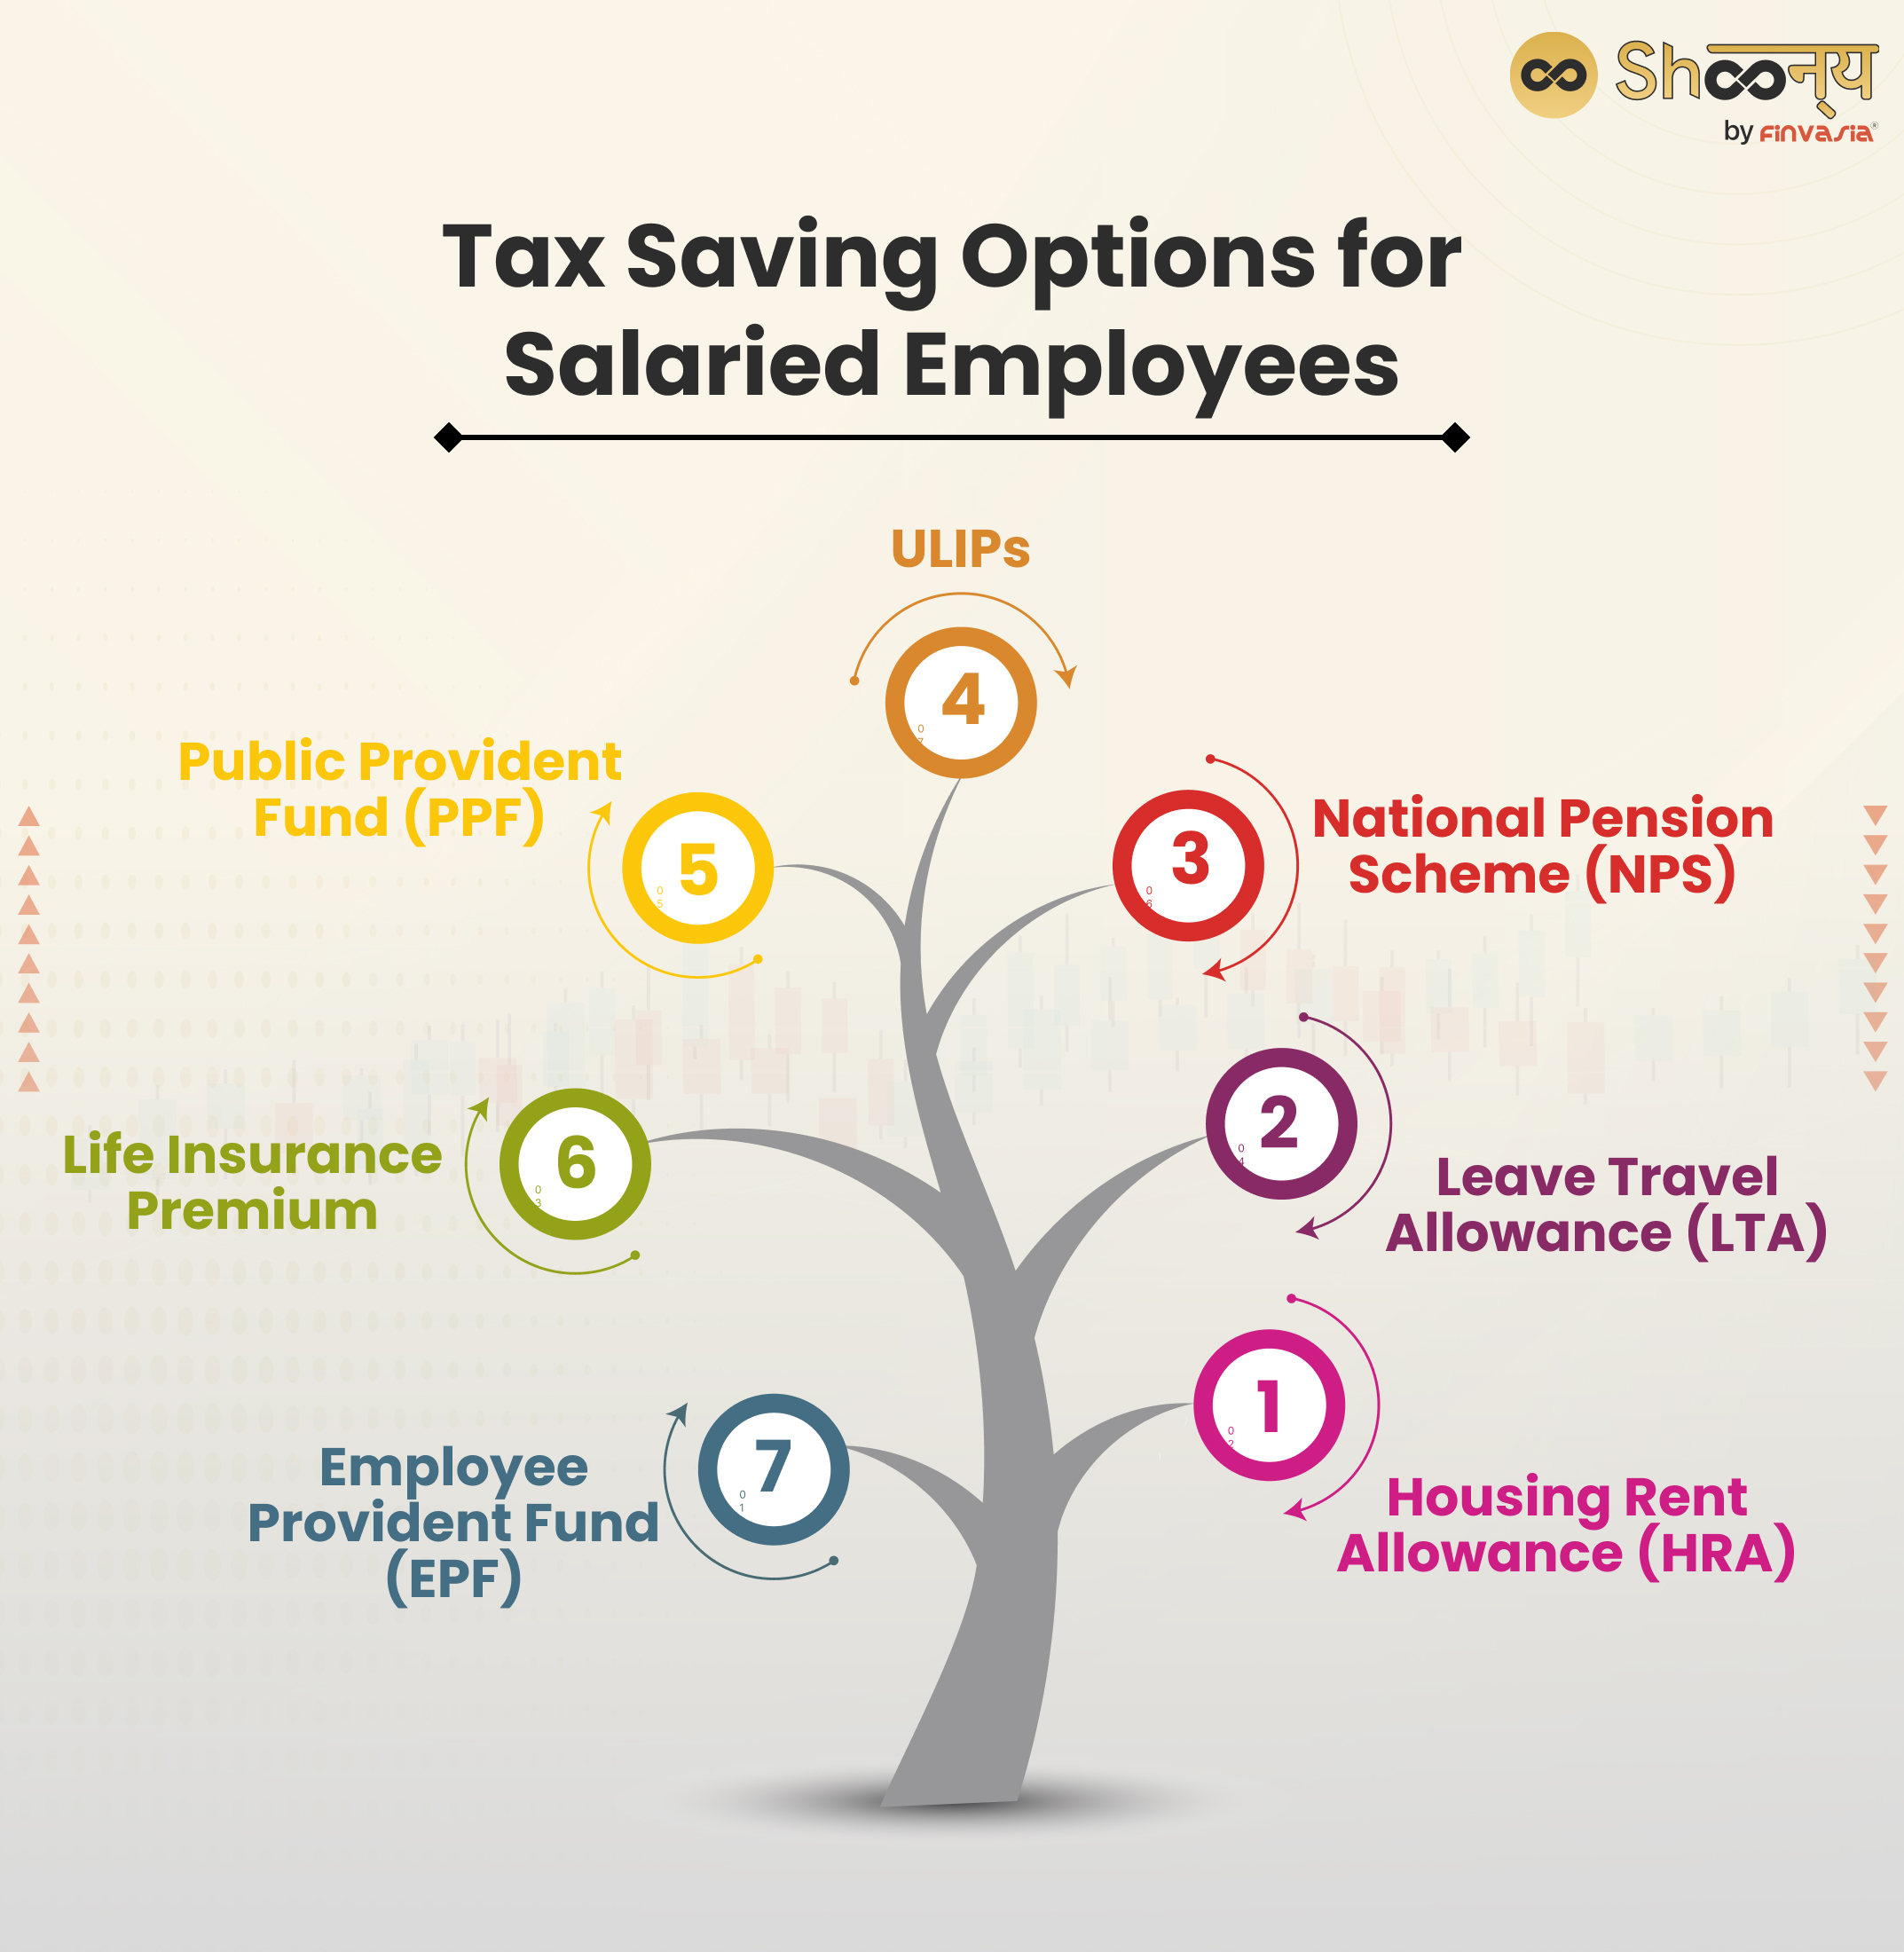 Tax Saving Options for Salaried Employees